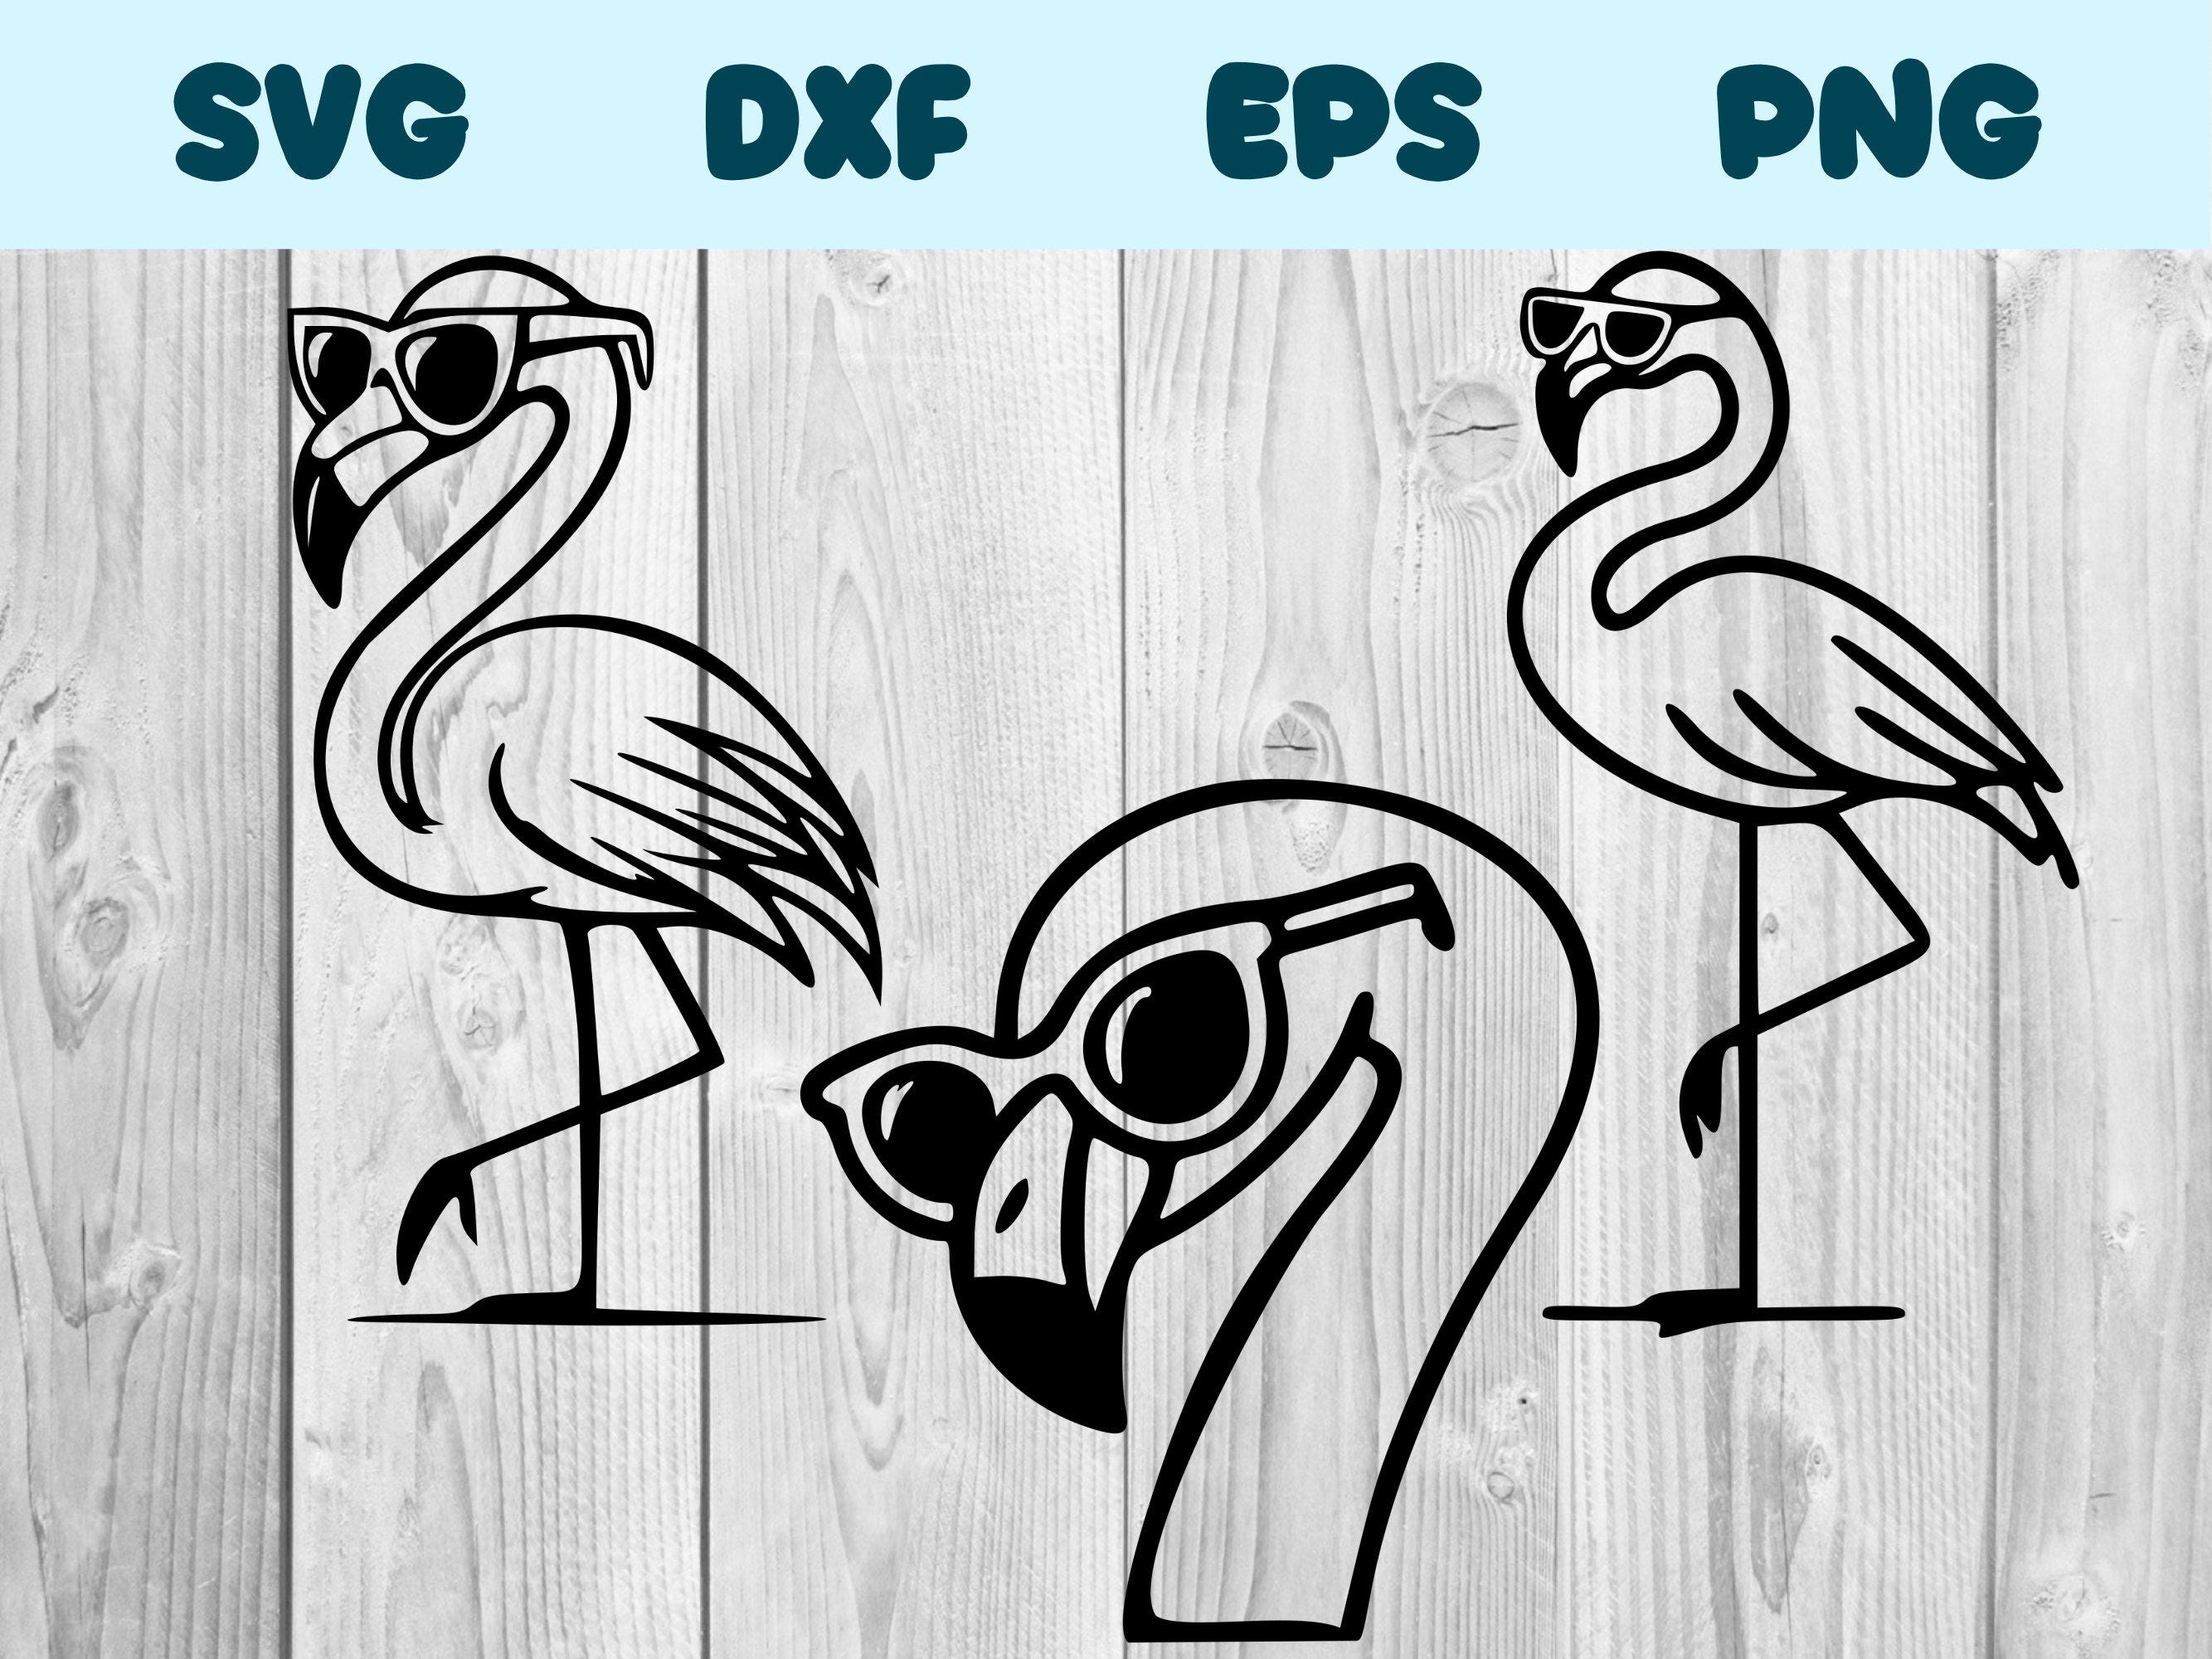 Flamingo With Glasses Svg Flamingo With Glasses Png Flamingo With Glasses Clipart Flamingo Vector Bundle Pack Commercial Use